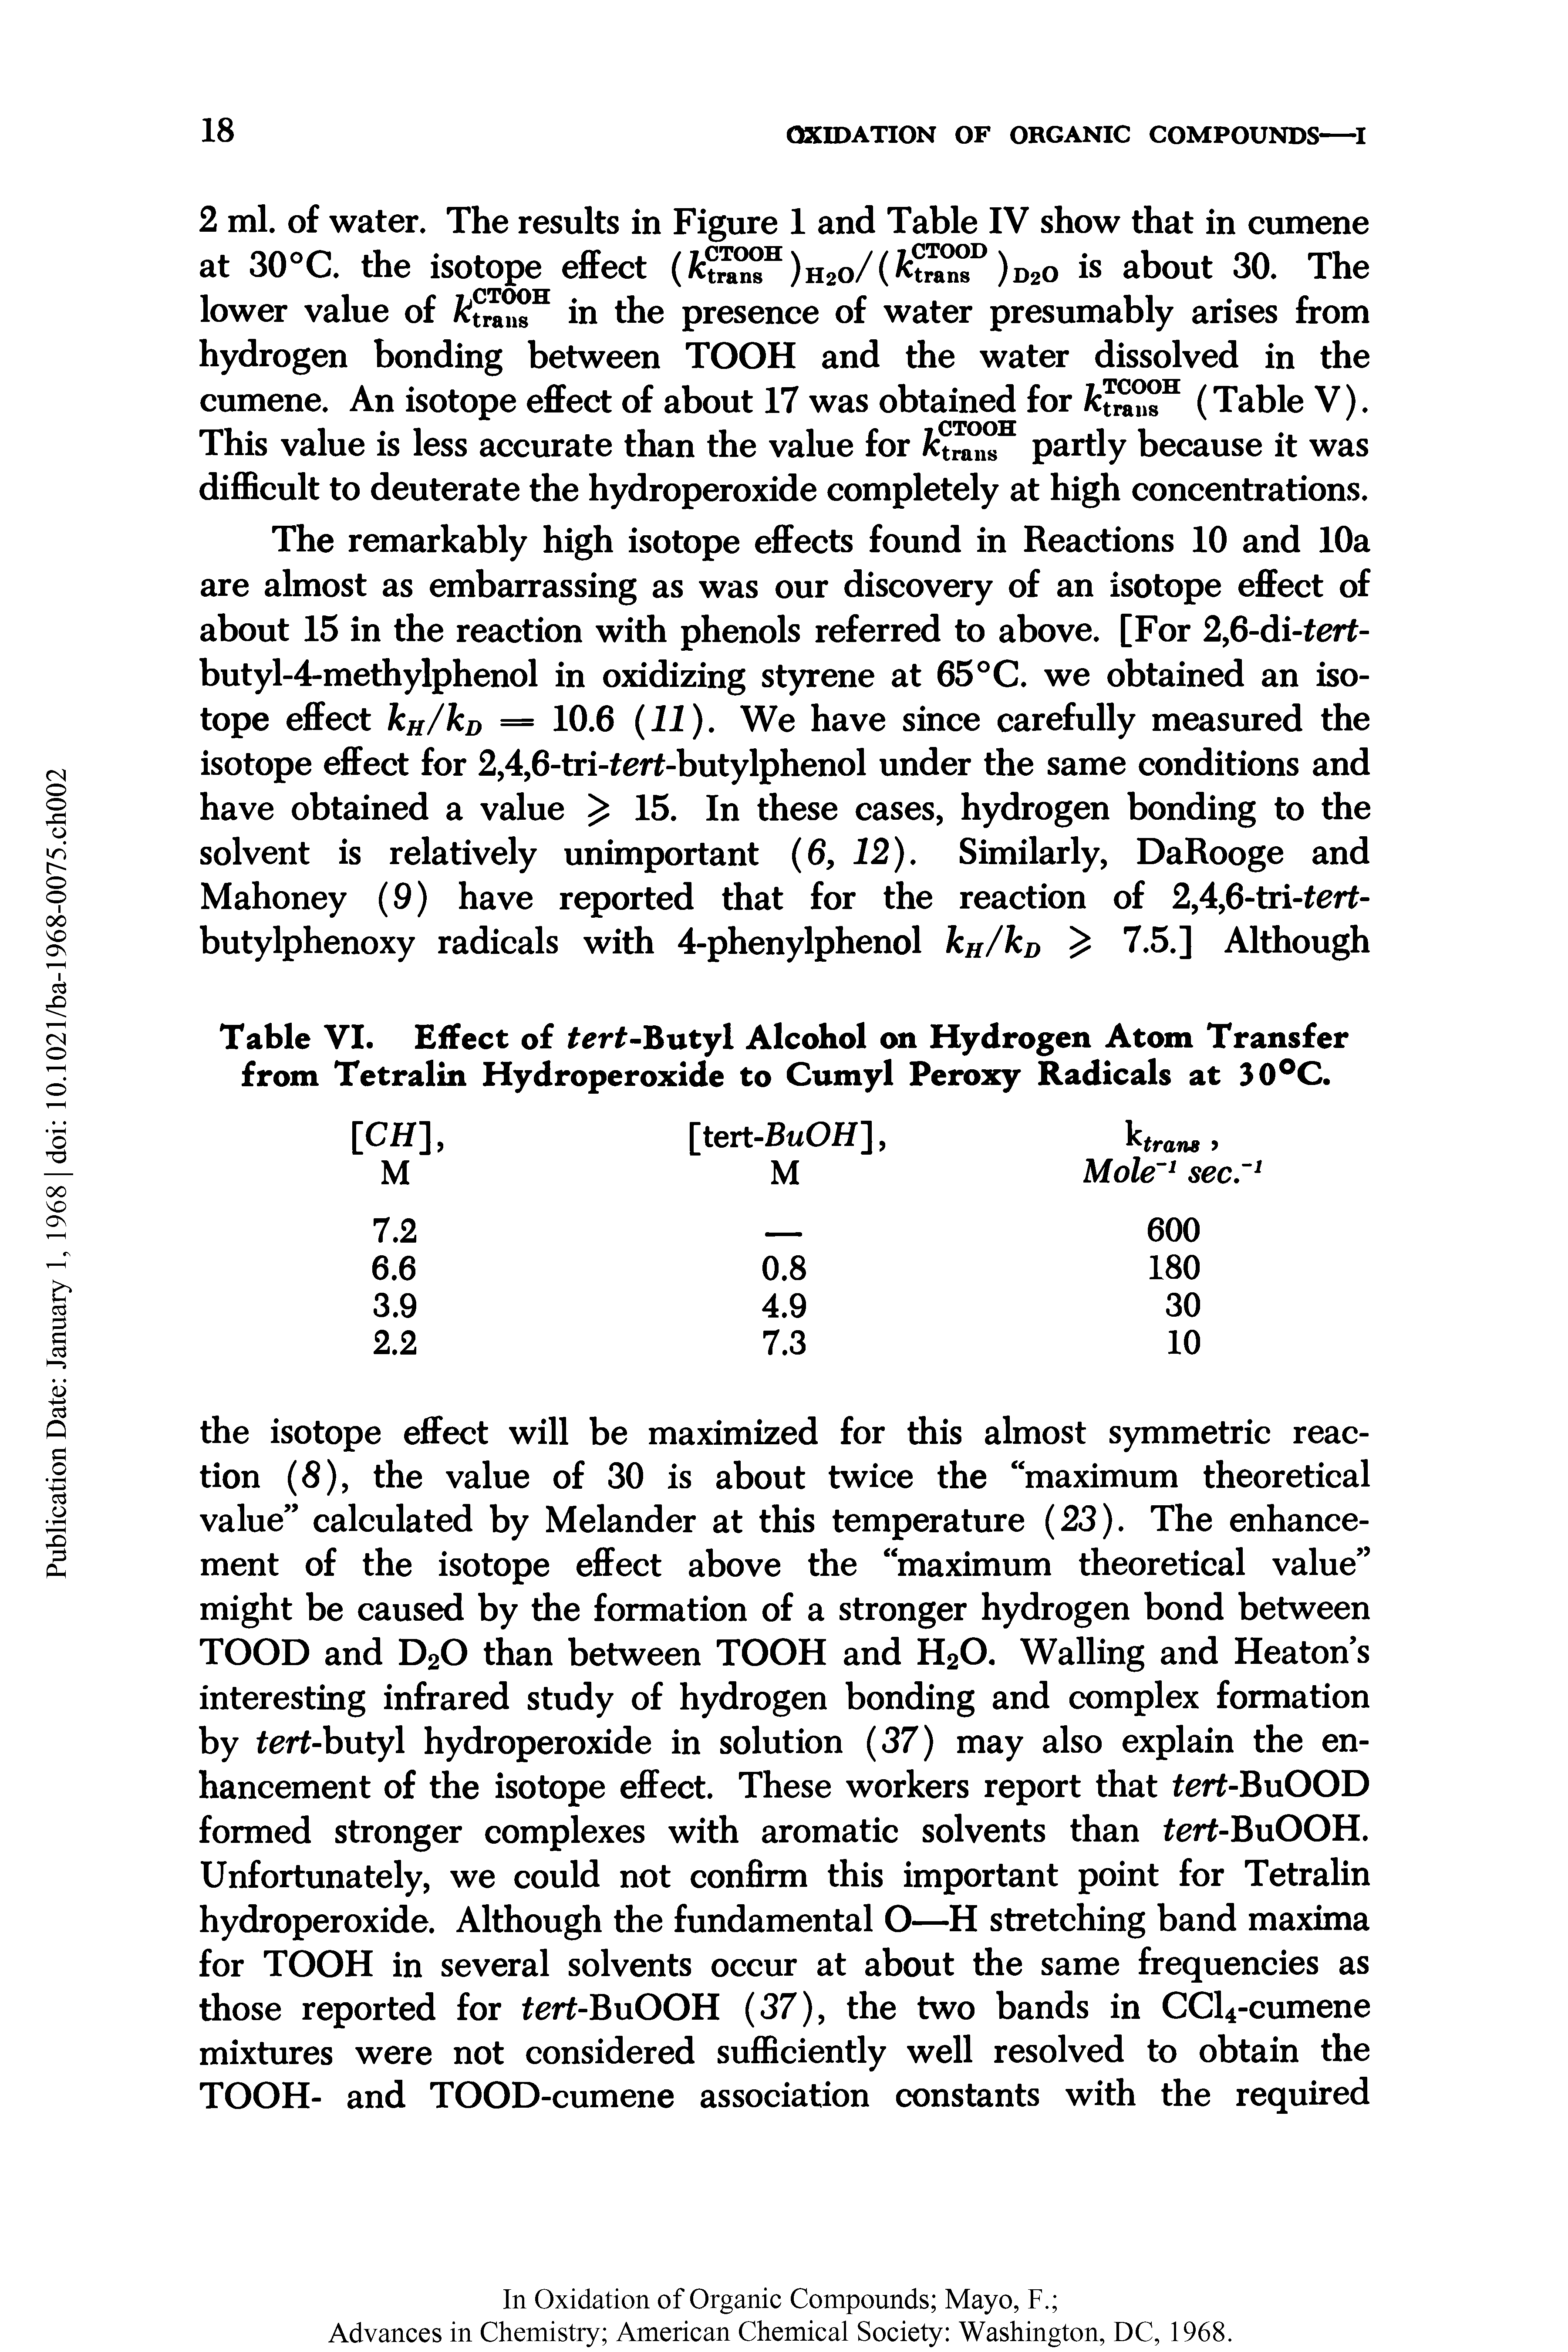 Table VI. Effect of tert-Butyl Alcohol on Hydrogen Atom Transfer from Tetralin Hydroperoxide to Cumyl Peroxy Radicals at 30°C.